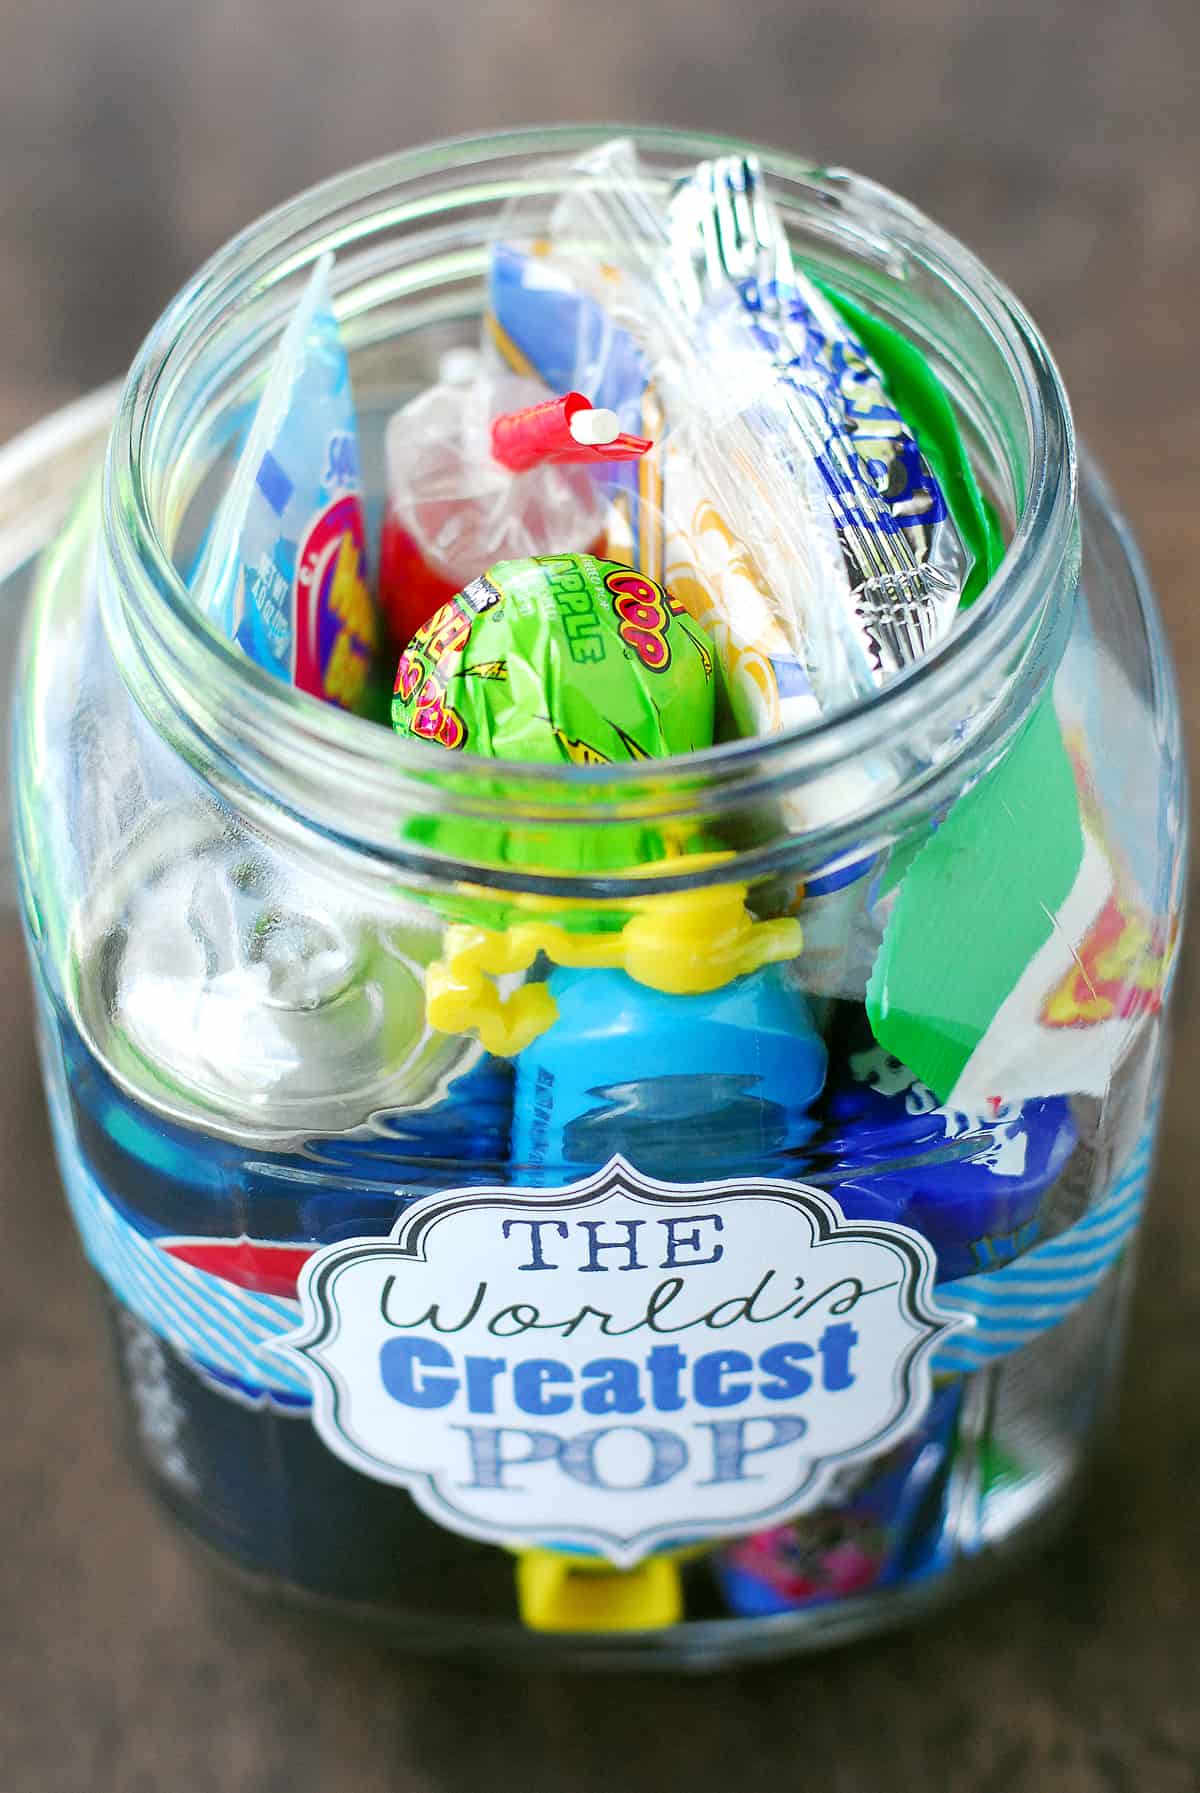 The world's greatest pop mason jar interior for father's day.